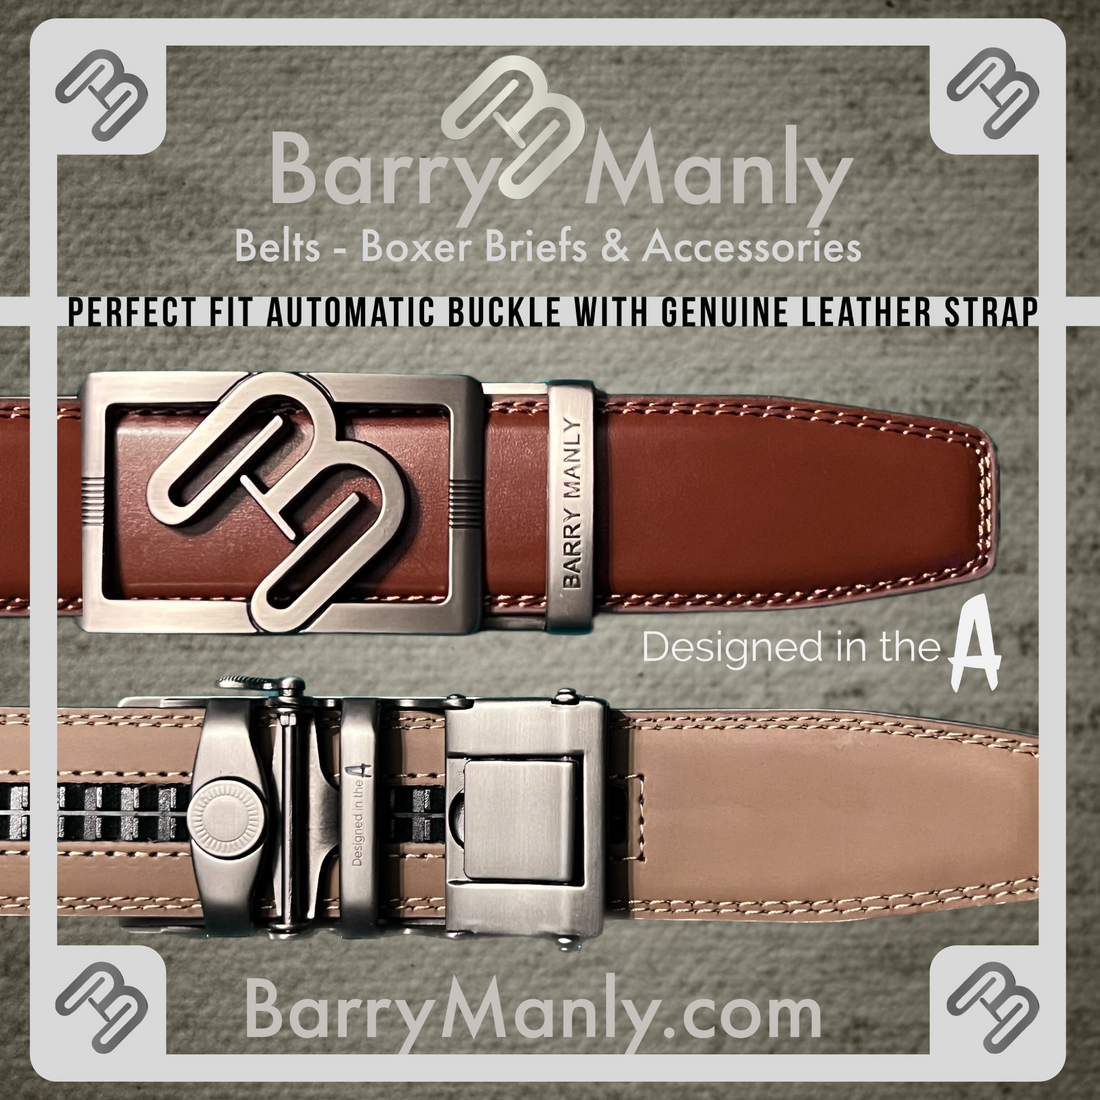 Introducing Barry Manly: The Epitome of Luxury Buckle and Leather Belts